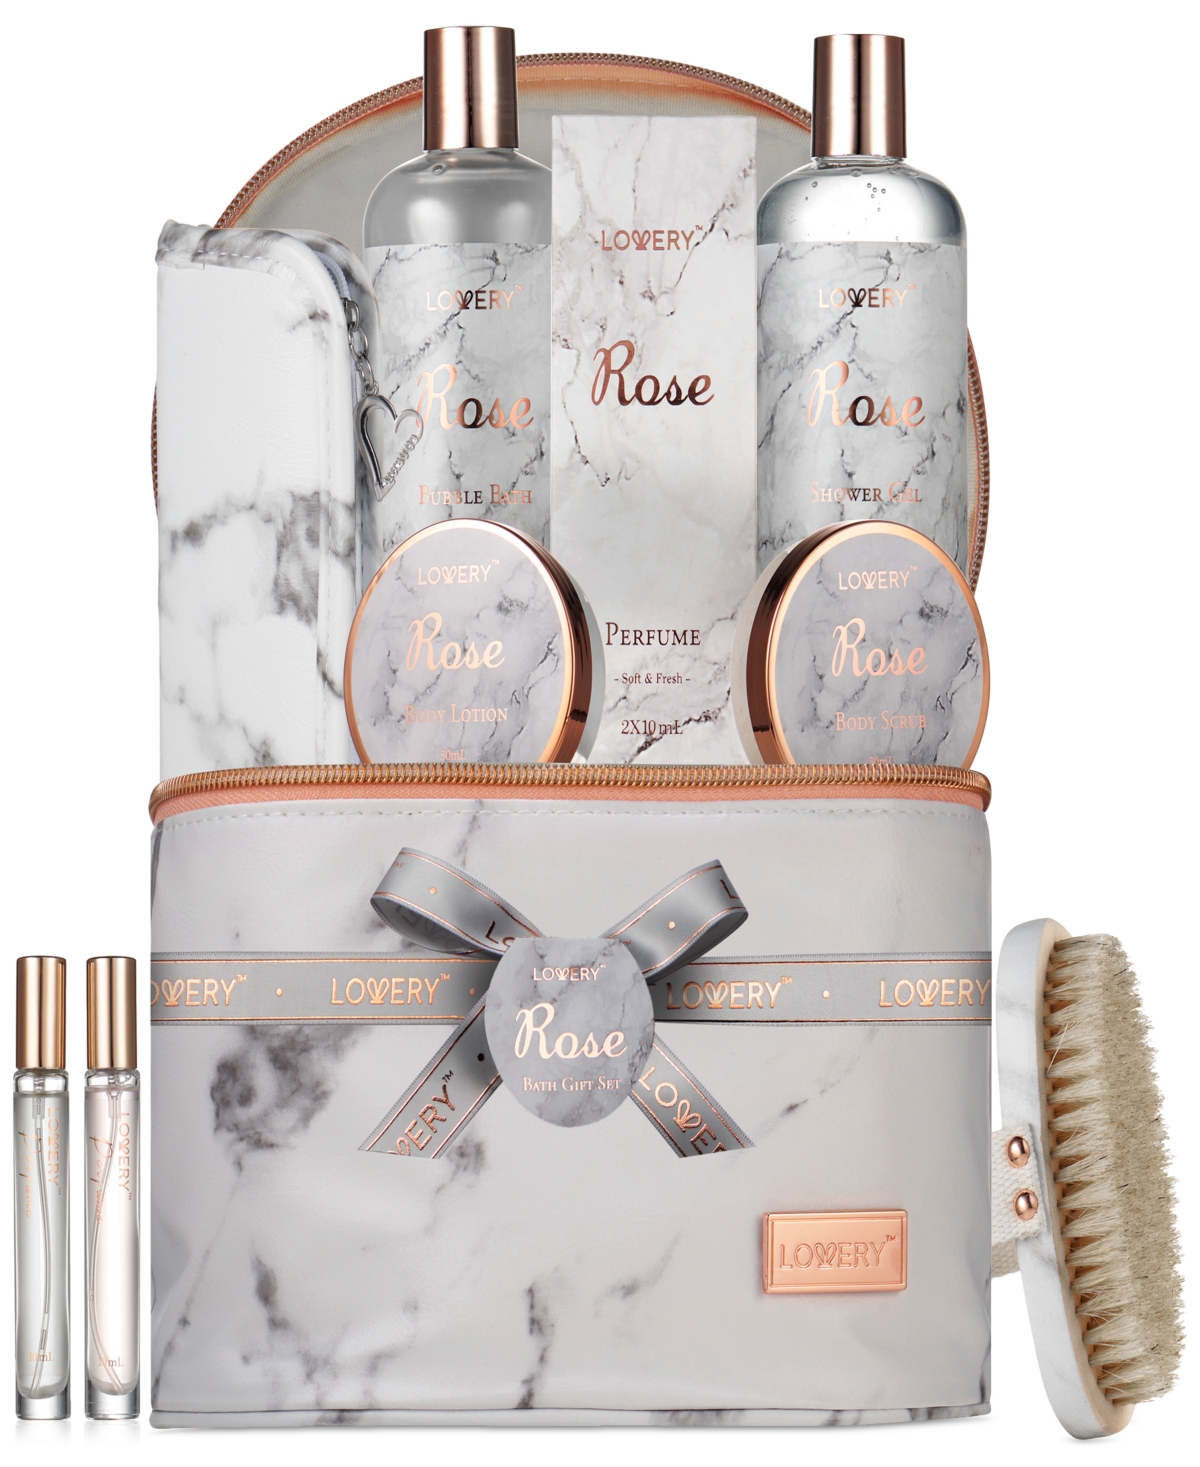 15-Pc. Rose Home Spa Luxury Body Care Gift Set